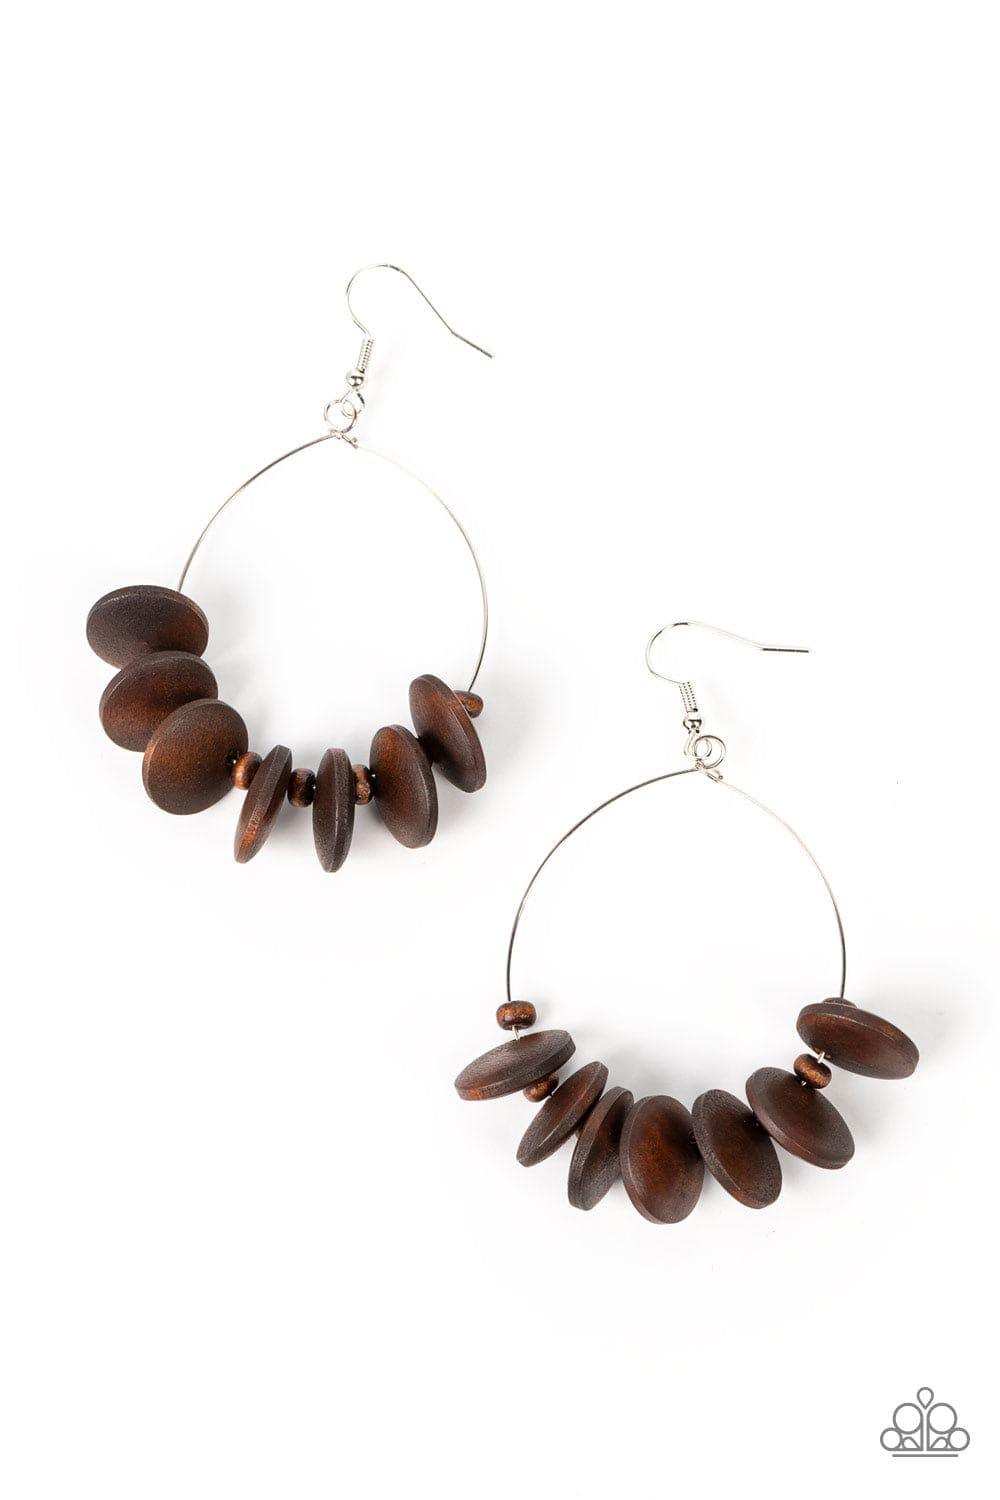 Paparazzi Accessories - Surf Camp - Brown Earrings - Bling by JessieK